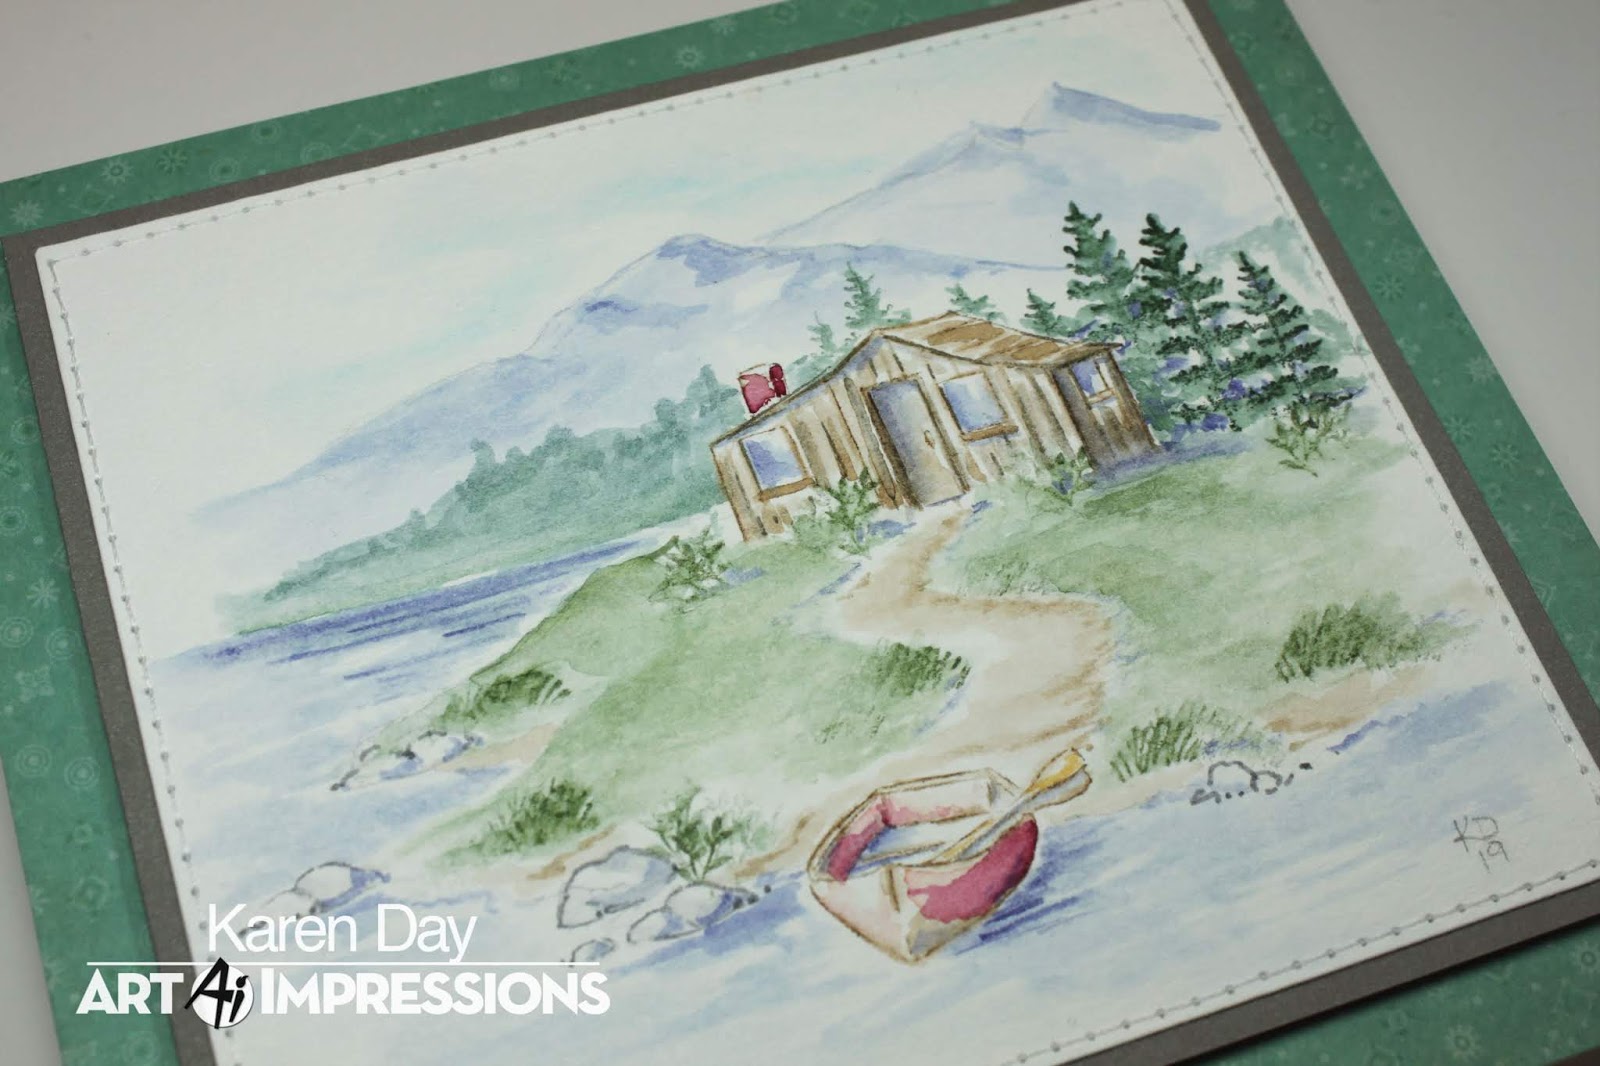 Art Impressions Blog: Watercolor Weekend Roundup - The Great Outdoors!